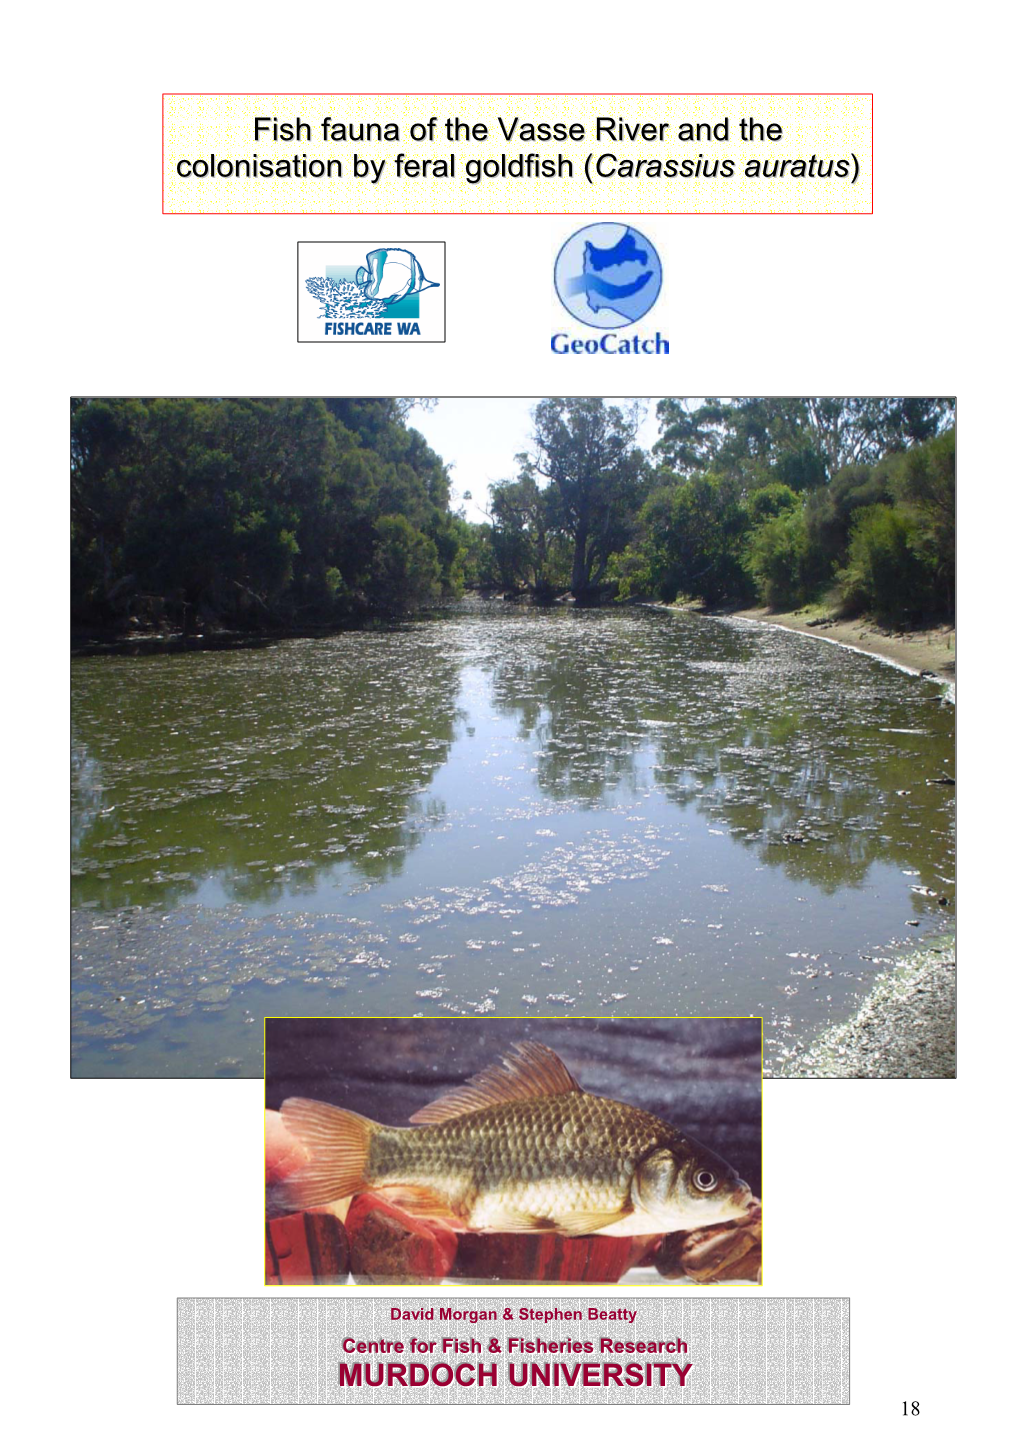 Fish Fauna of the Vasse River and the Colonisation by Feral Goldfish (Carassius Auratus)